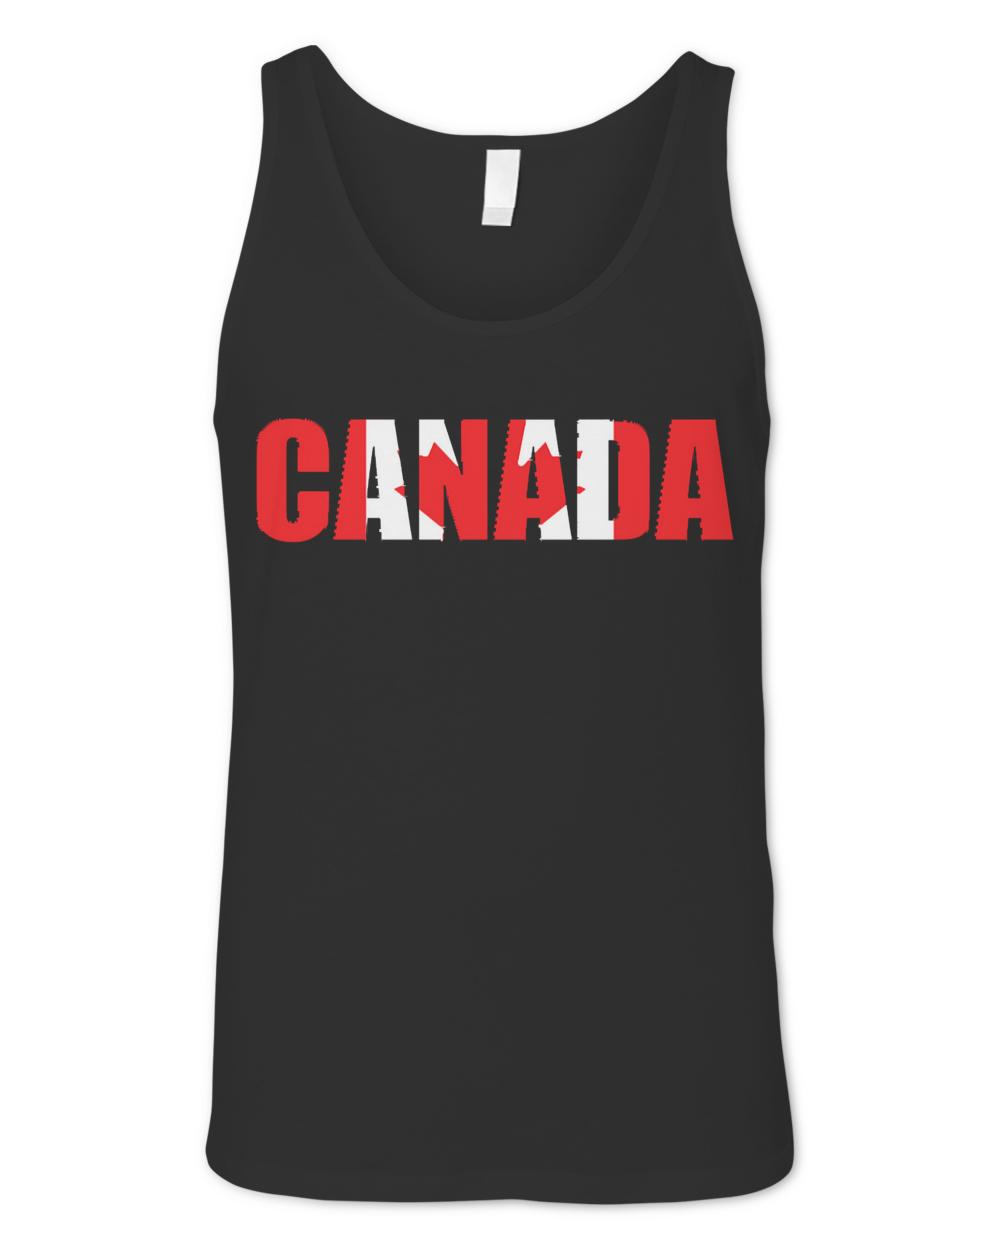 Canada T- Shirt Canada with Flag in the Lettters T- Shirt